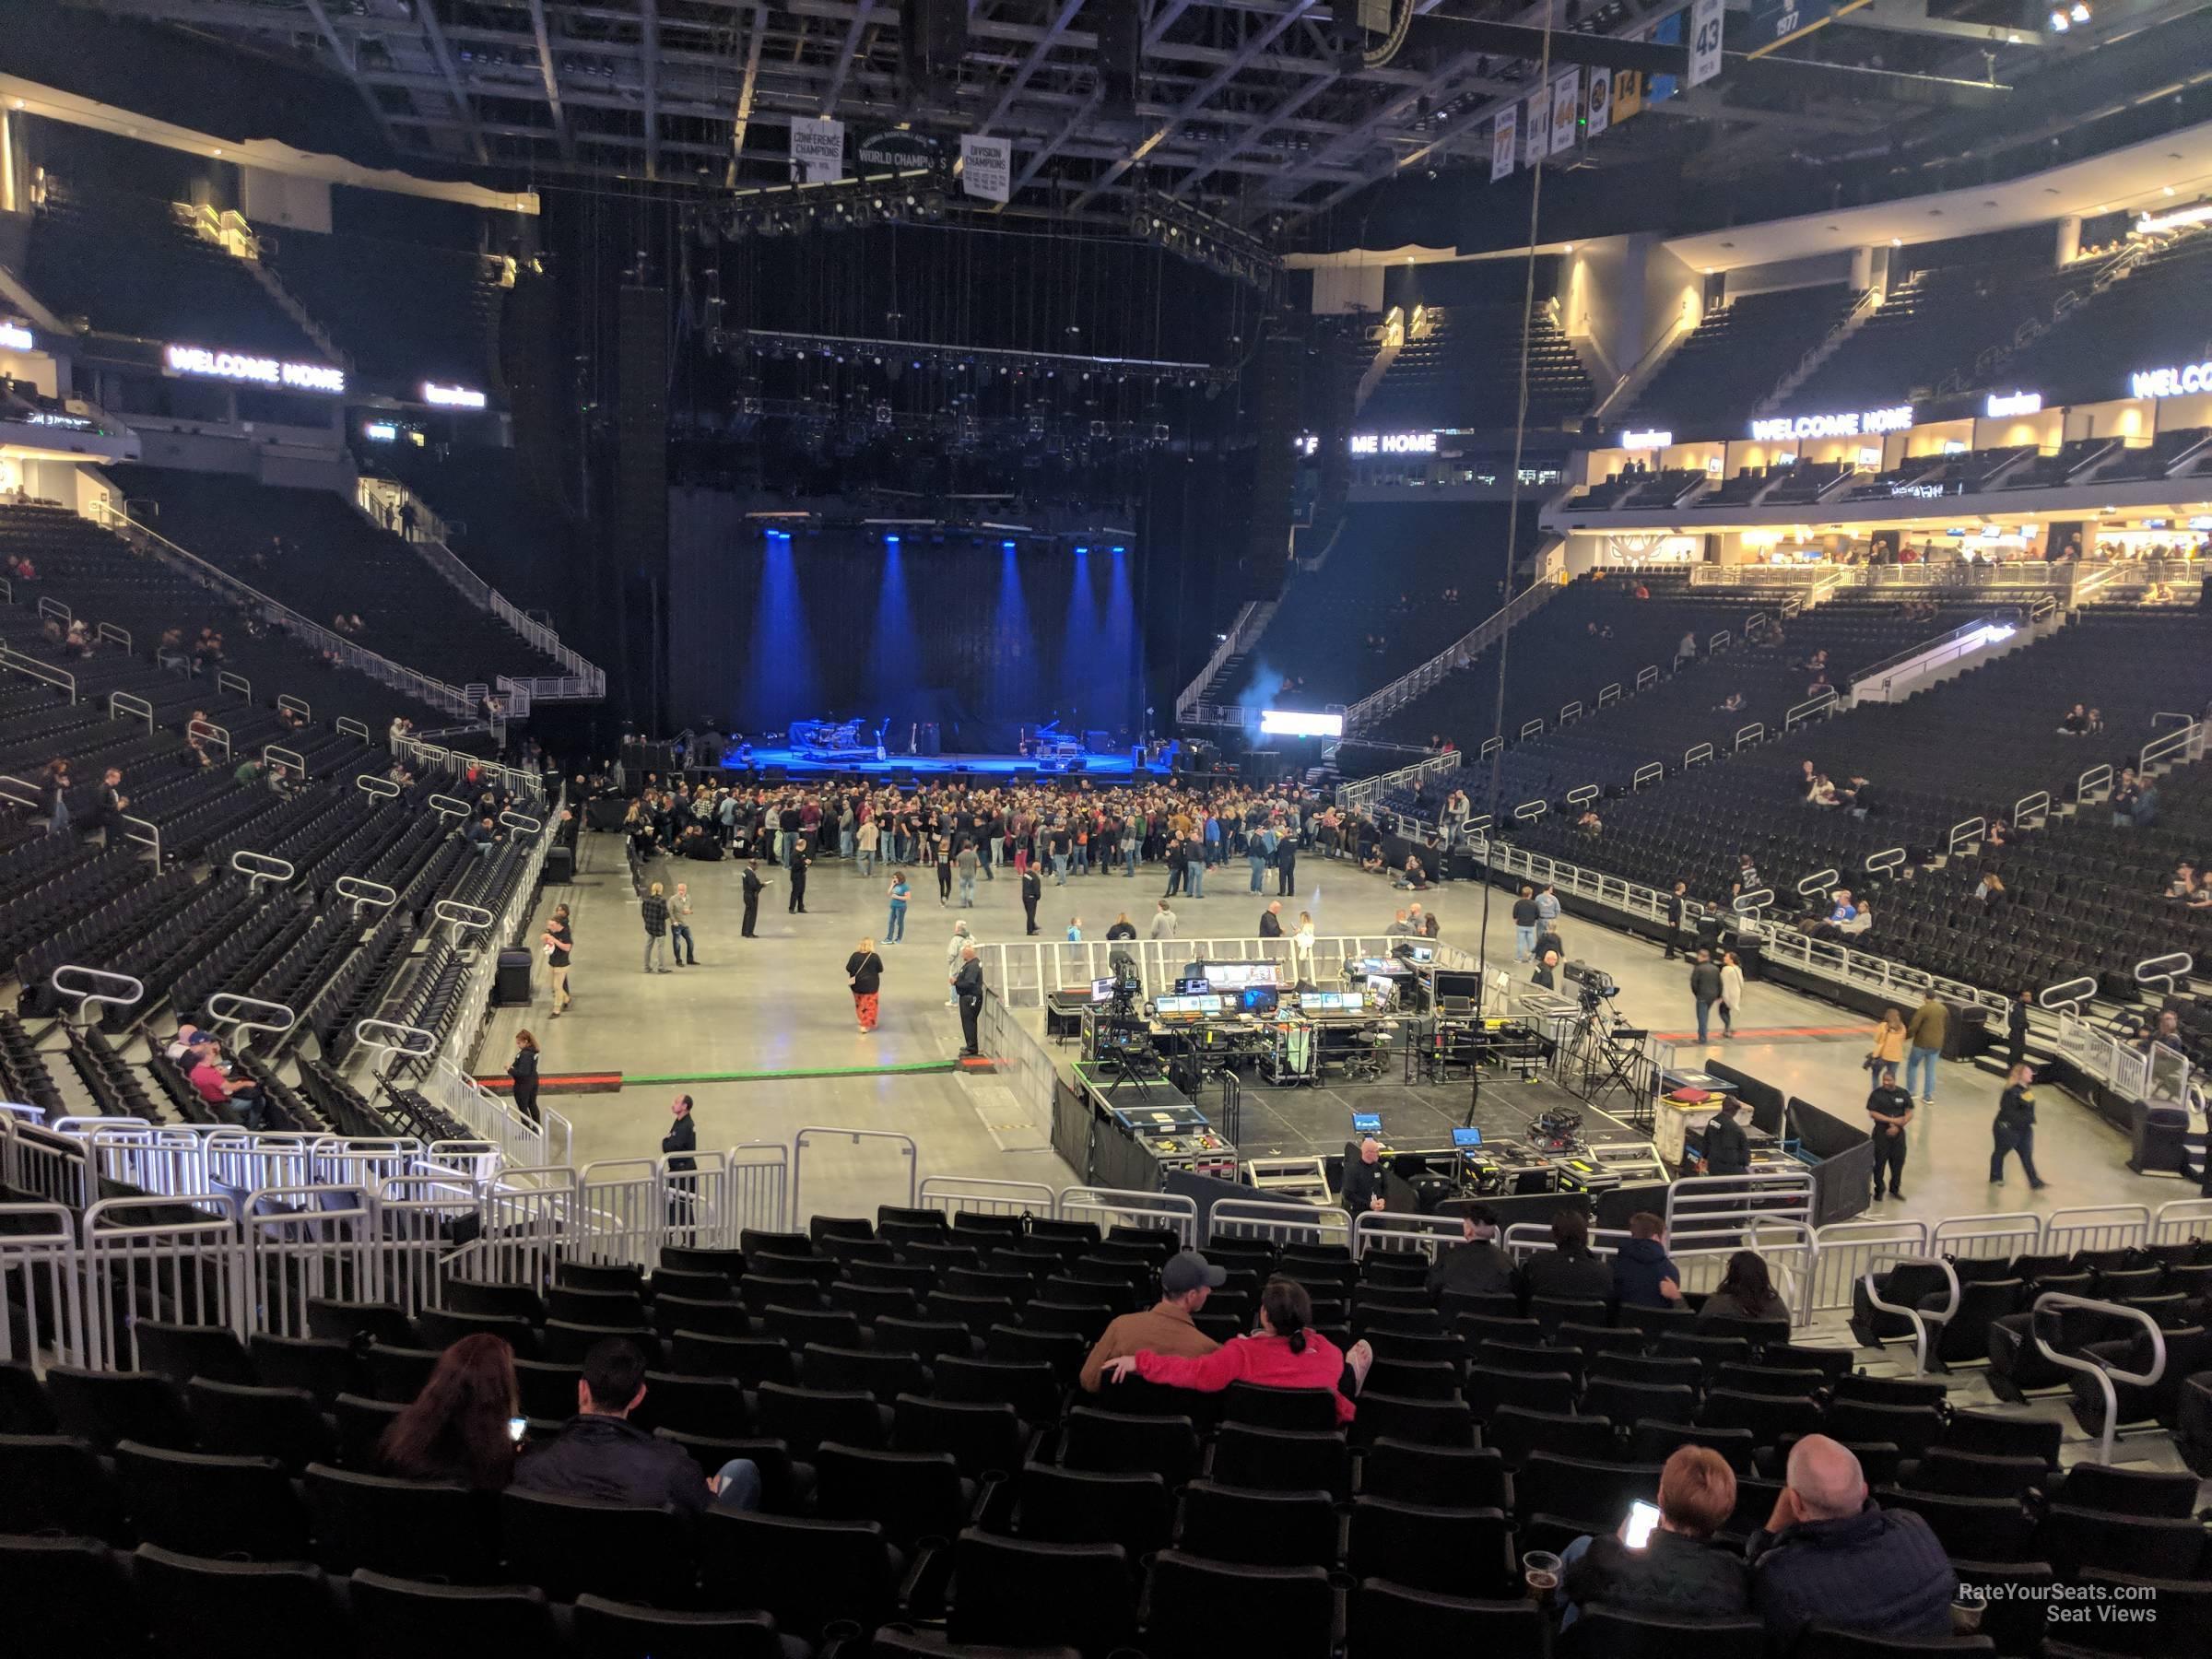 Section 102 at Fiserv Forum for Concerts